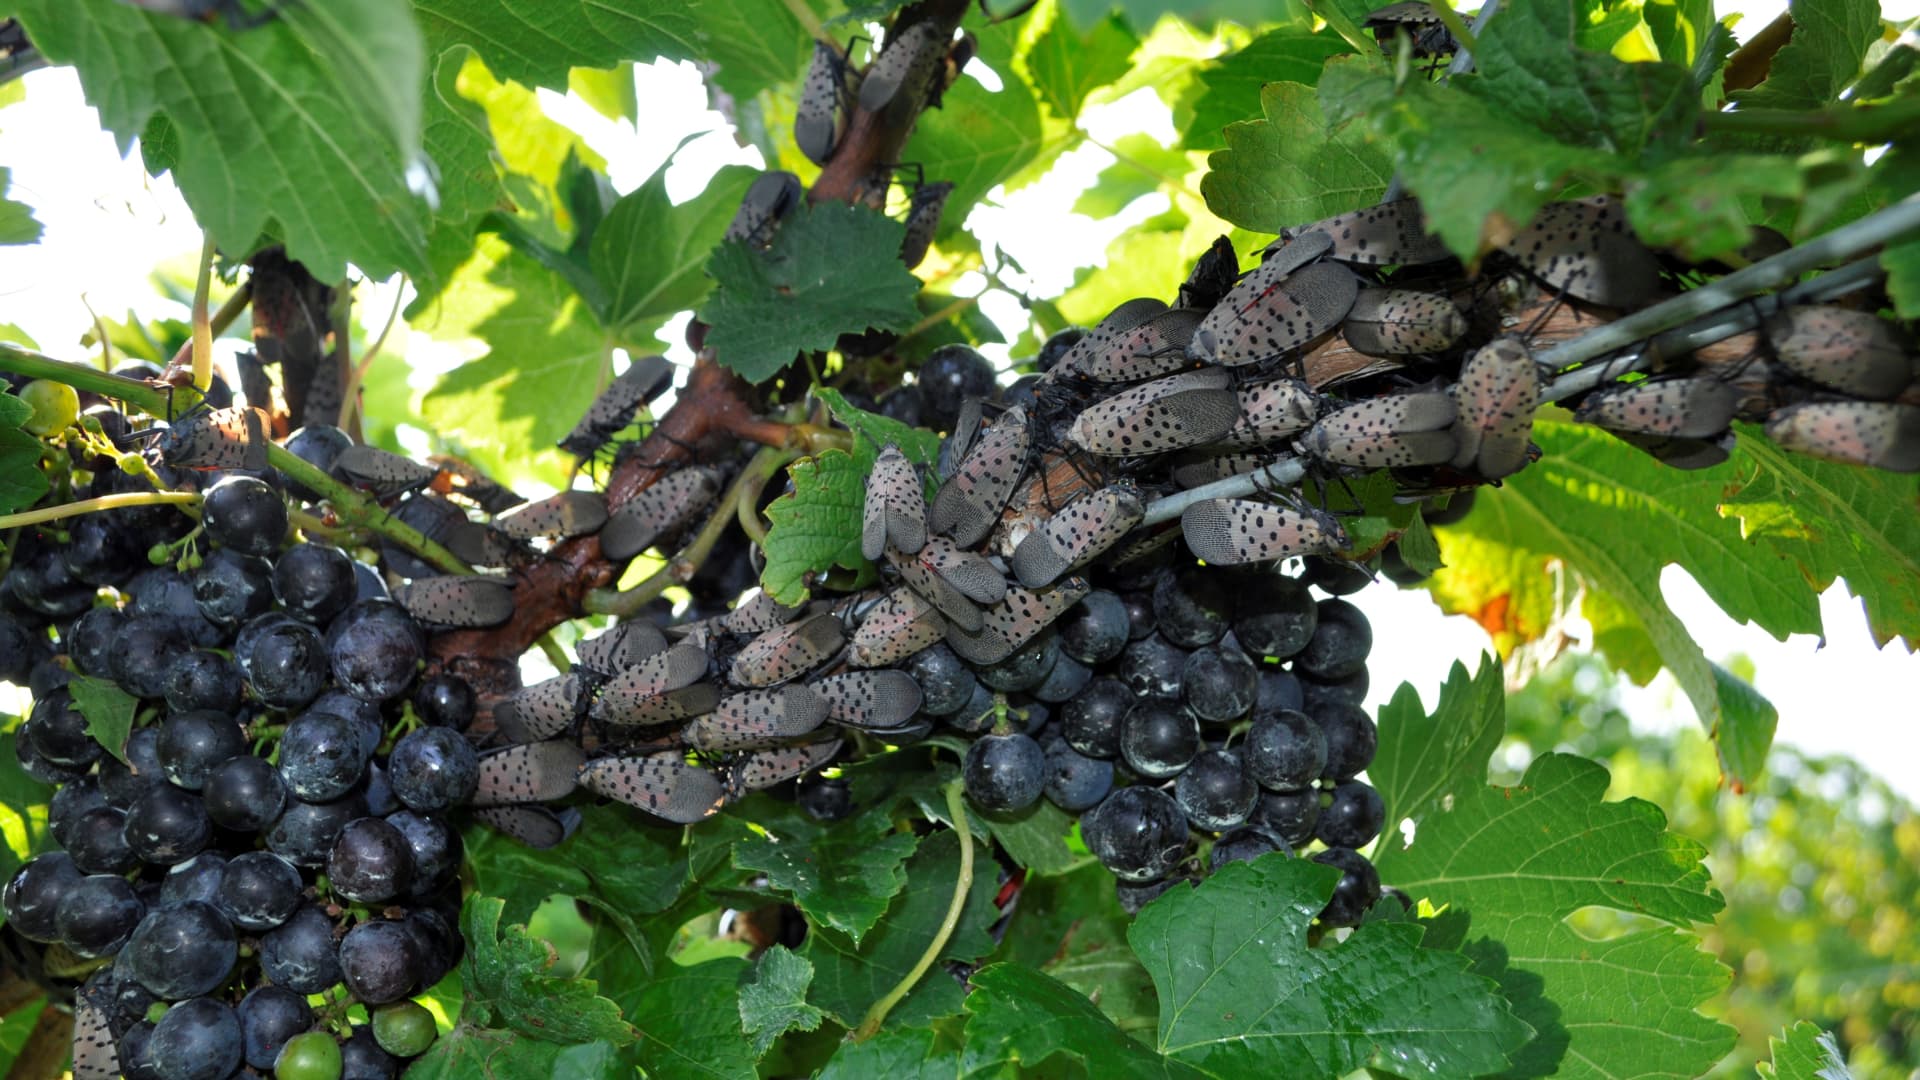 Spotted lanternflies are feasting on U.S. grapevines and putting vineyards at risk